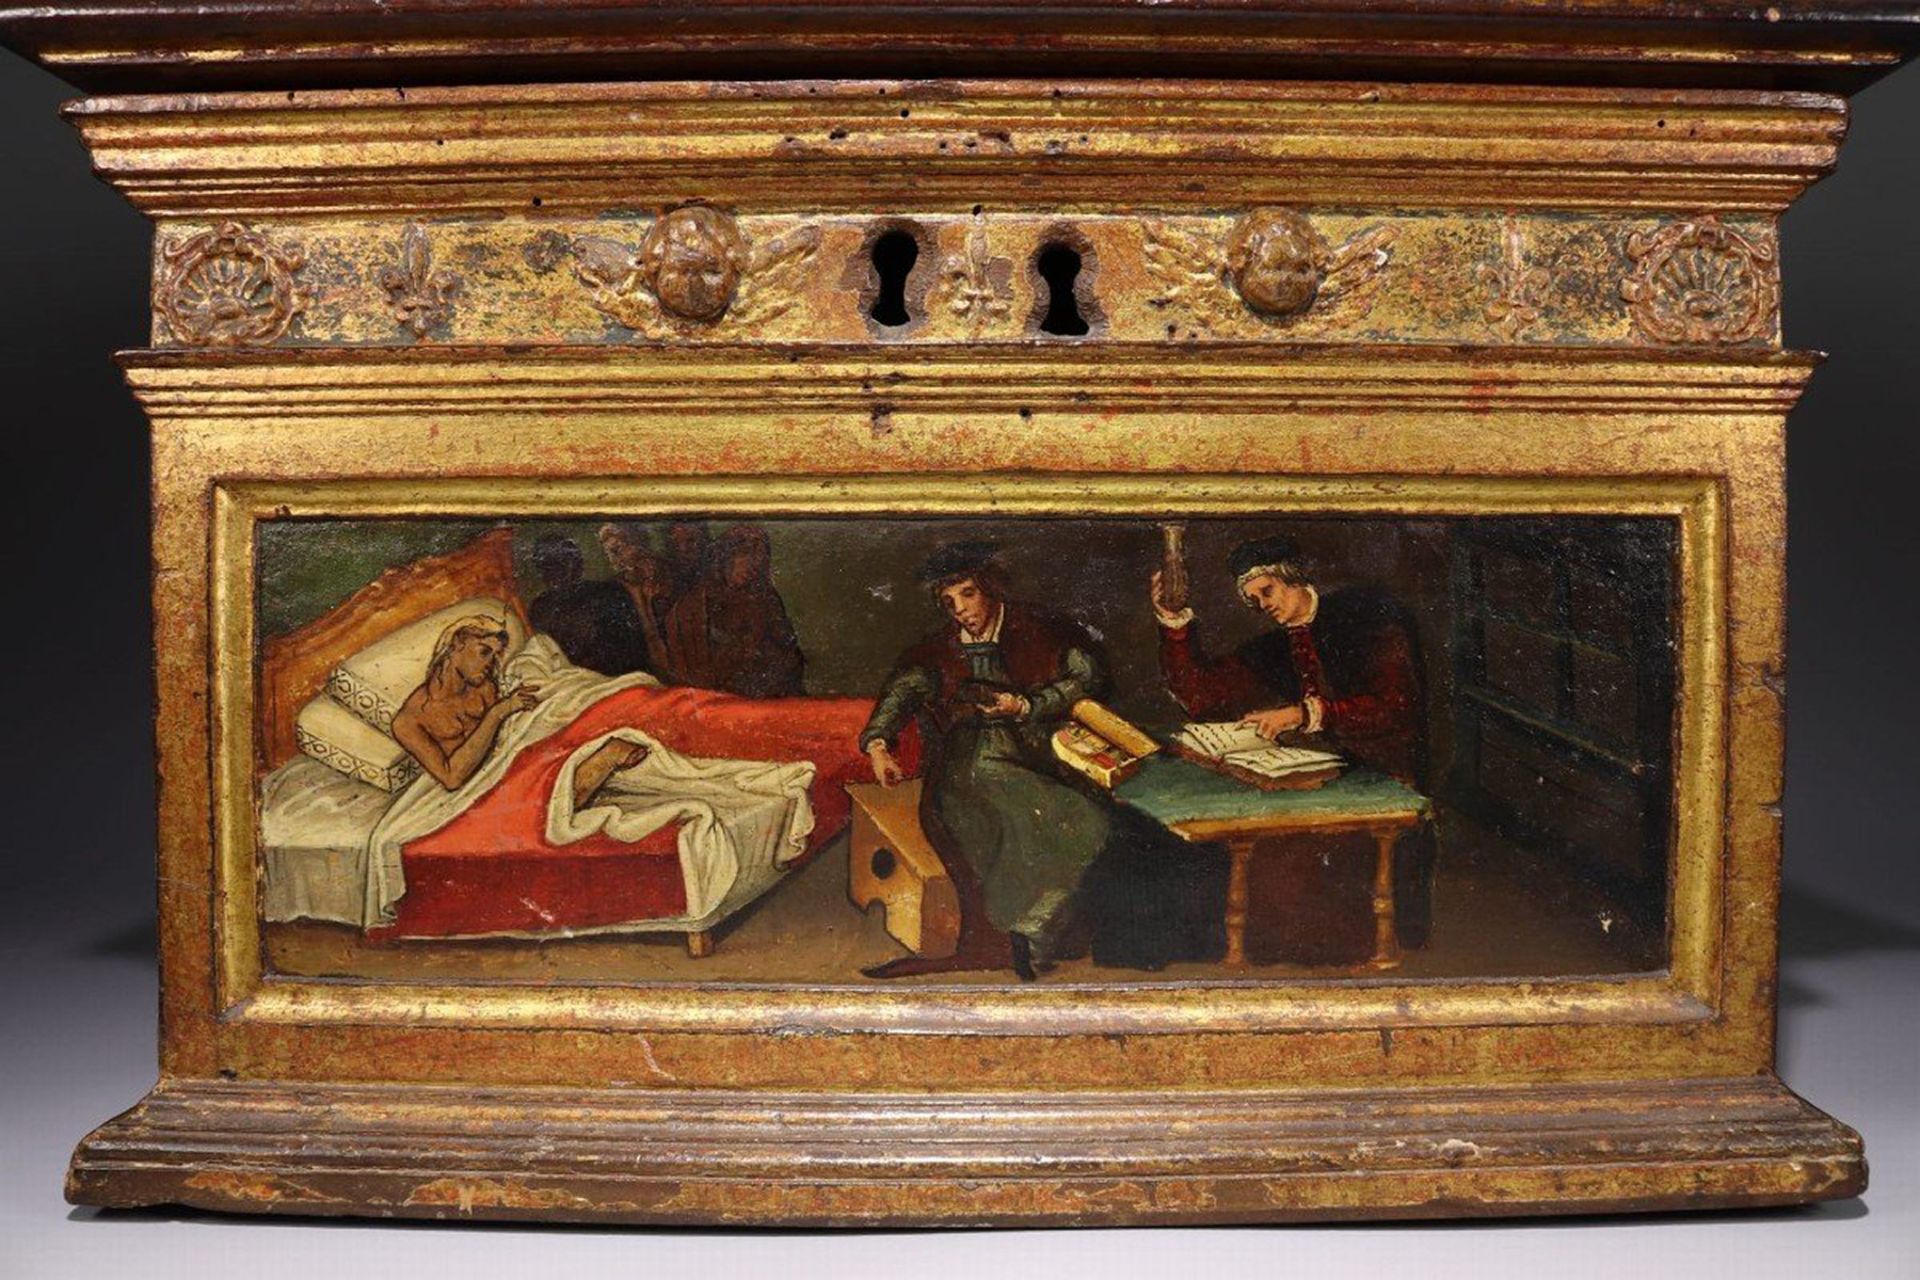 Rare Italian Medical Chest of the Renaissance, Milan or Vizcaya, made by the house of Medinaceli, he - Image 2 of 10